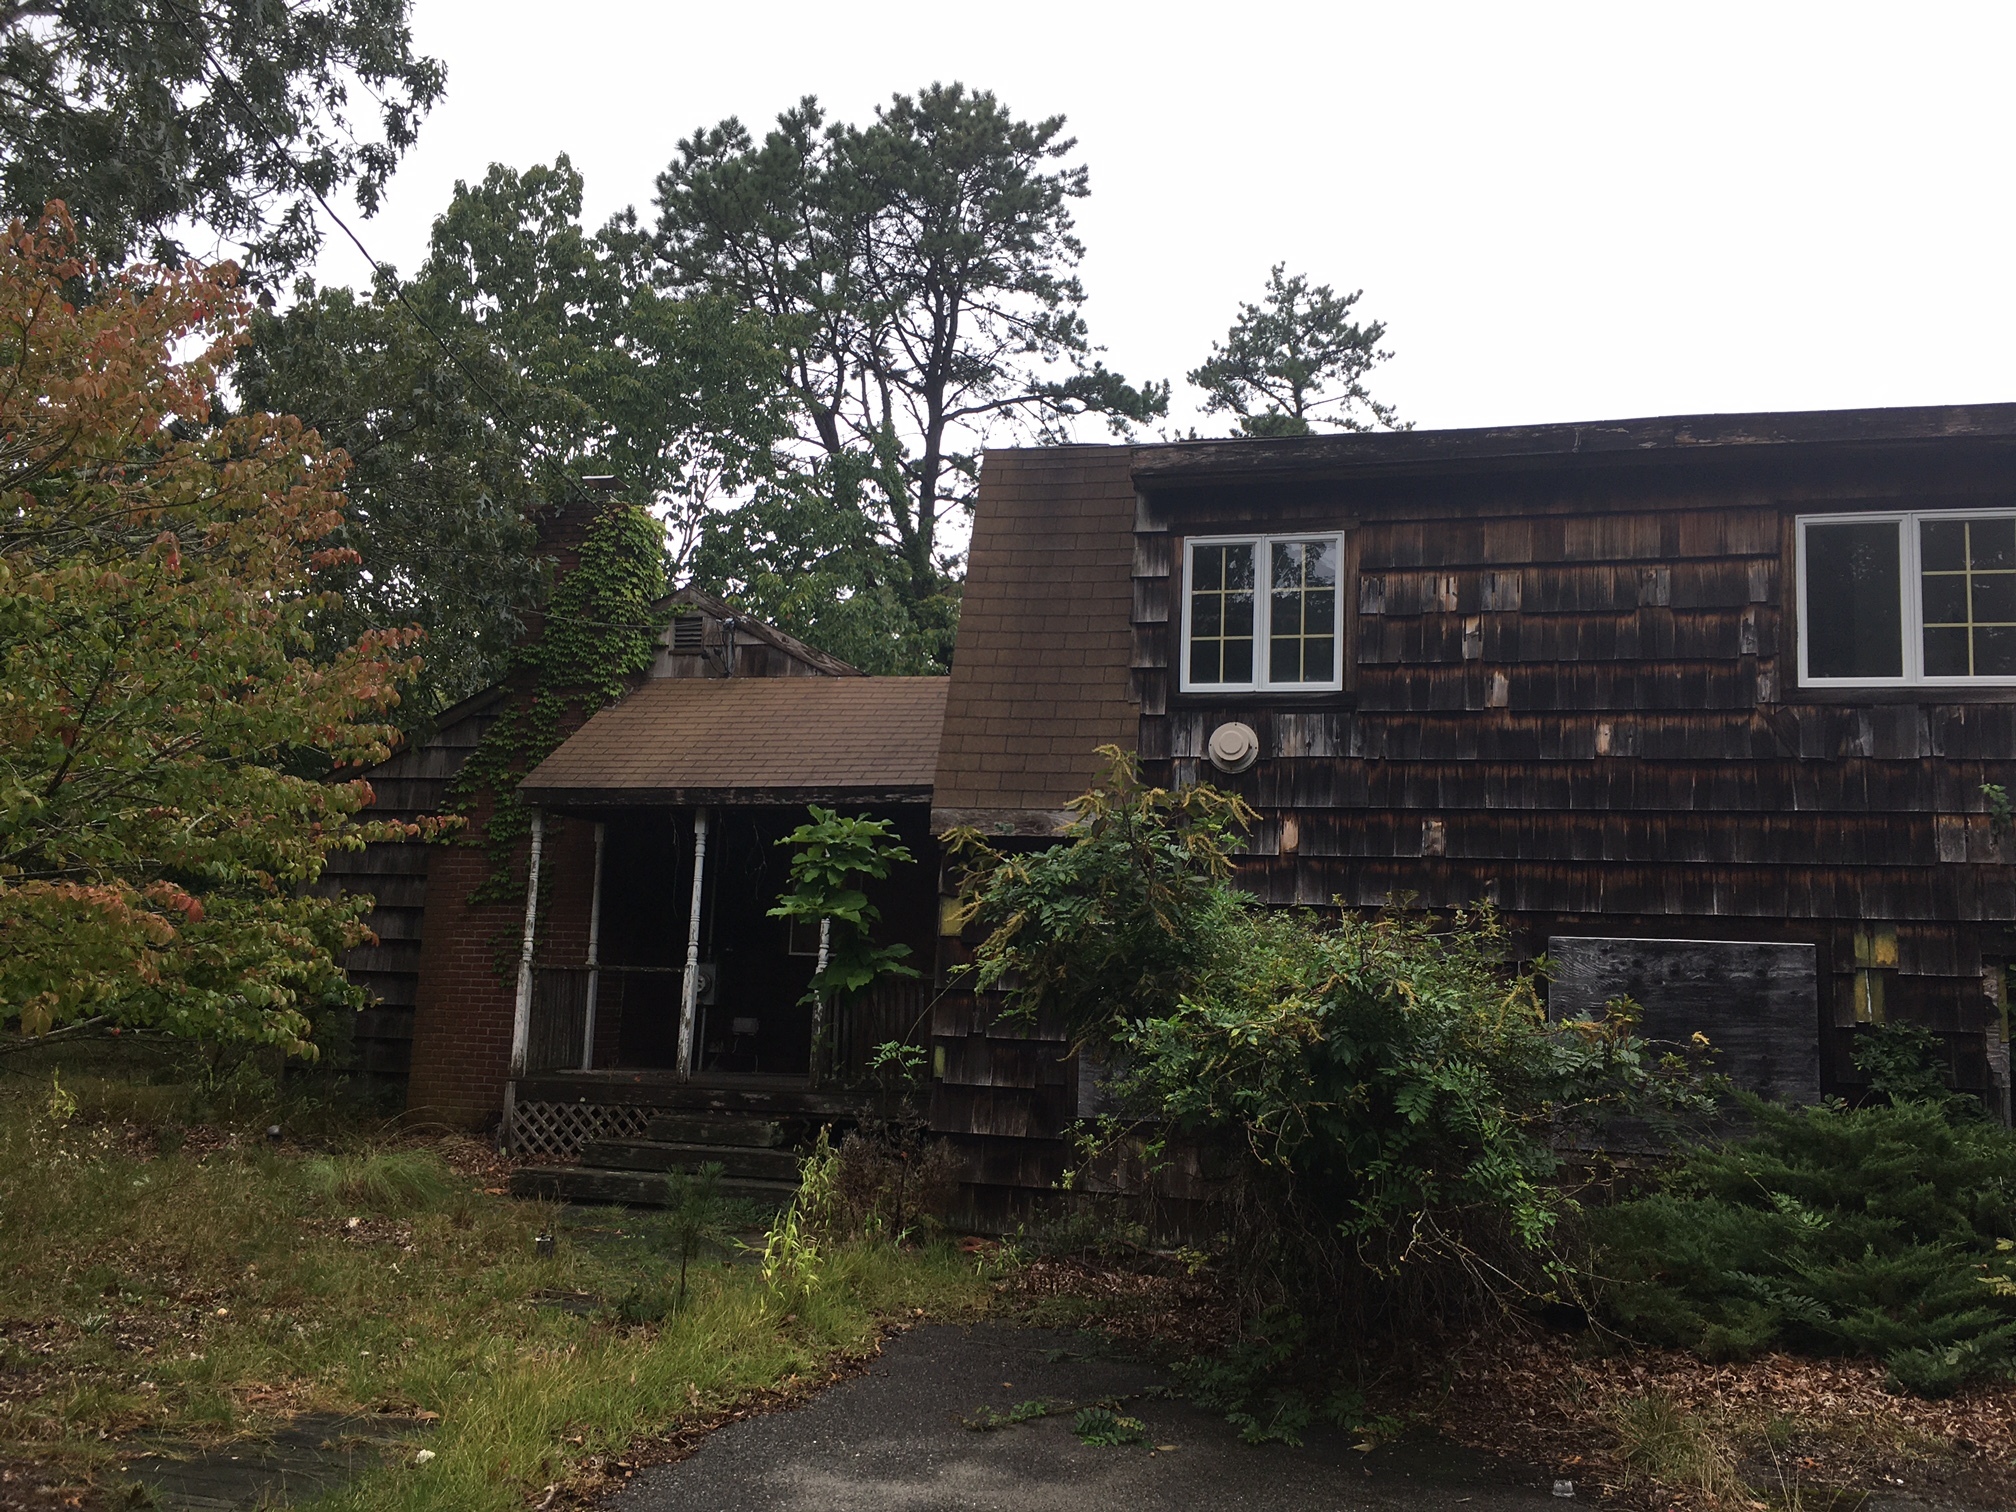 Purchased by the Town of Southampton in 2007, the caretaker's house at Camp Tekakwitha in Hampton Bays, now a zombie house, will be demolished.